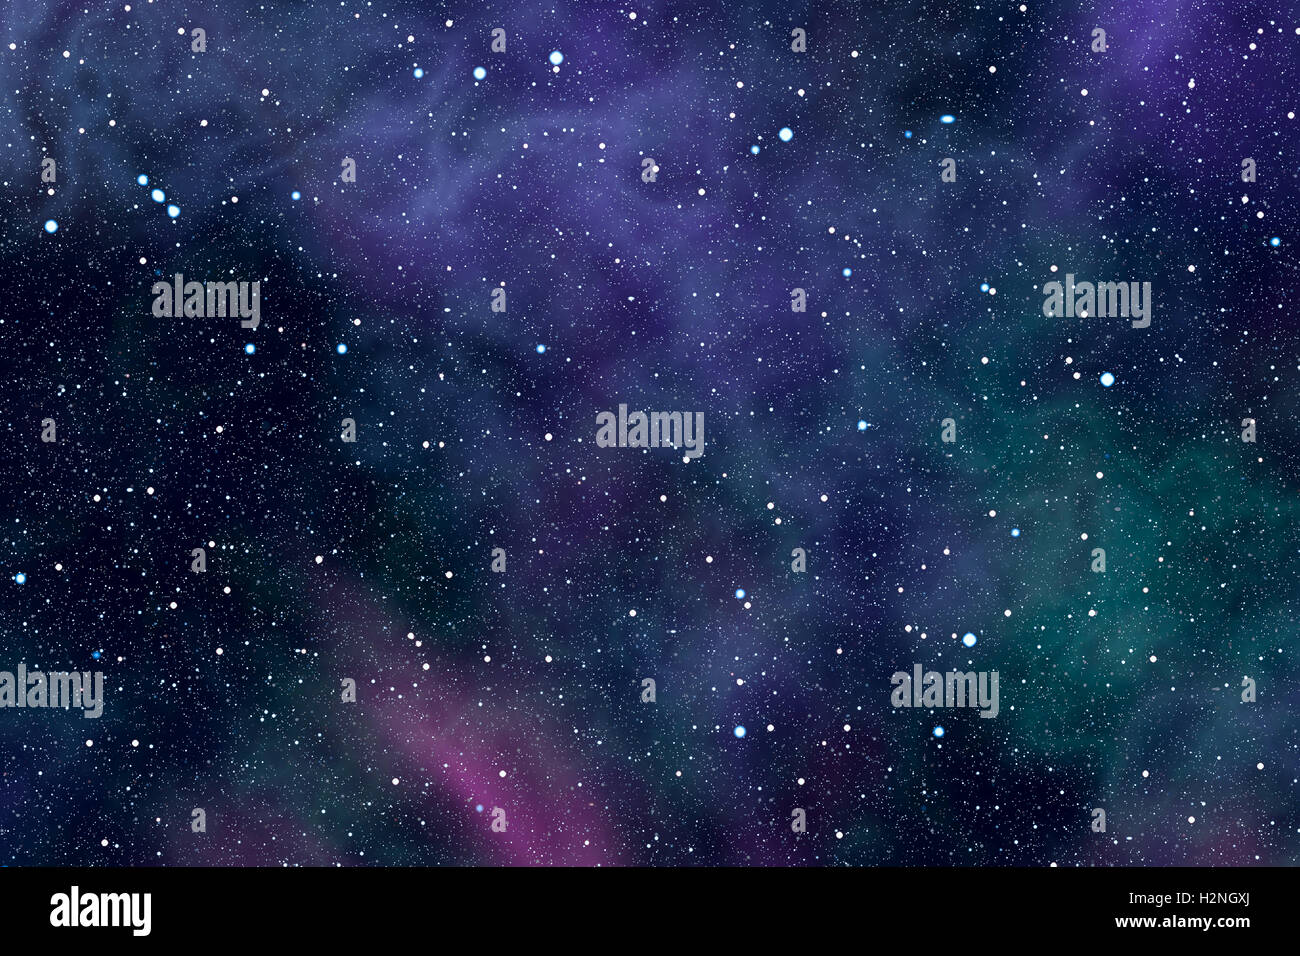 High resolution abstract background with cosmic space filled by stars and colored nebulae. Stock Photo